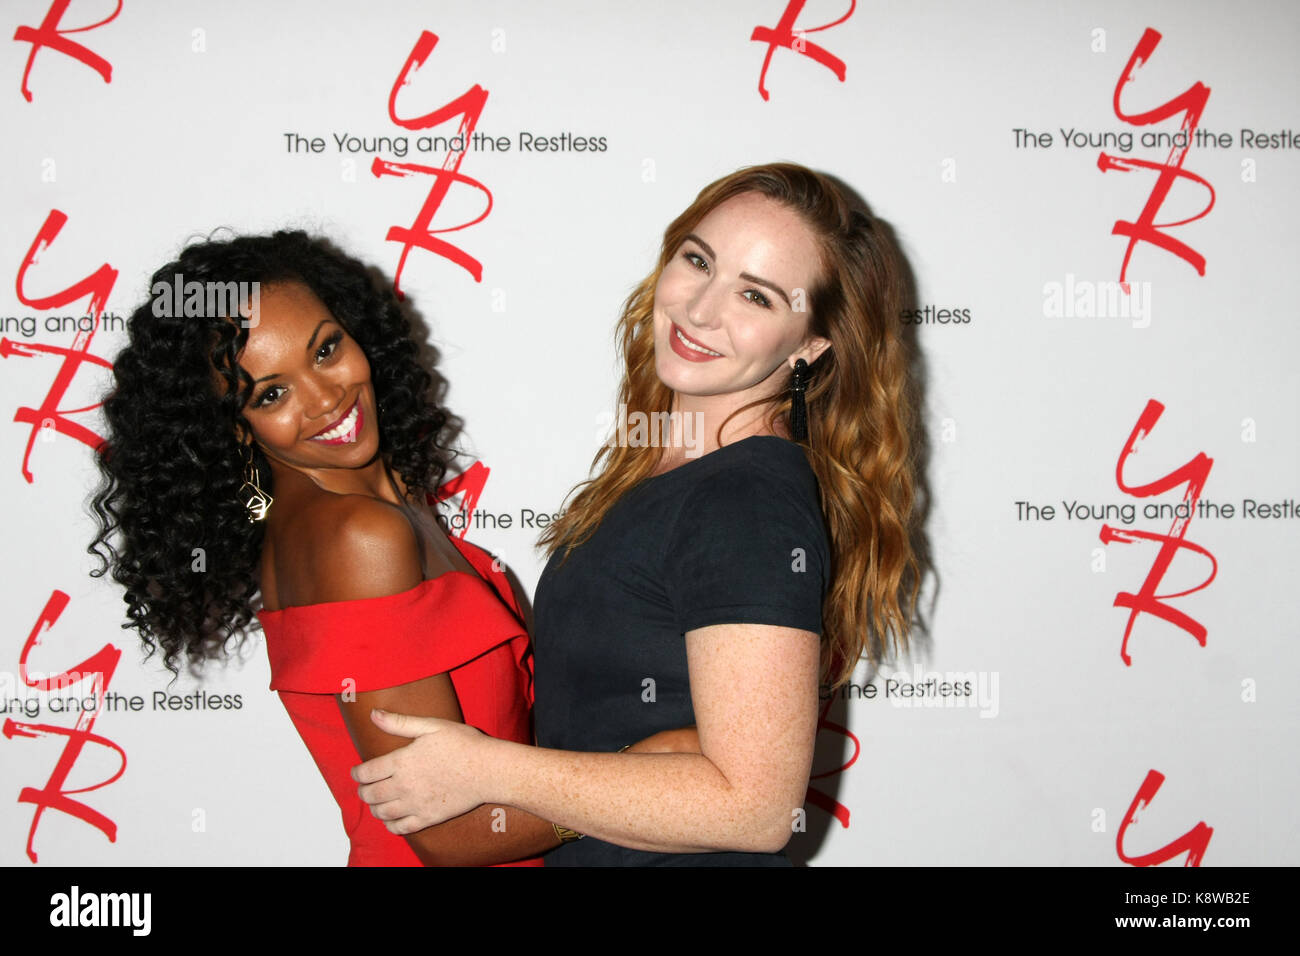 Young and Restless Fan Event 2017 at the Marriott Burbank Convention Center on August 19, 2017 in Burbank, CA  Featuring: Mishael Morgan, Camryn Grimes Where: Burbank, California, United States When: 20 Aug 2017 Credit: Nicky Nelson/WENN.com Stock Photo